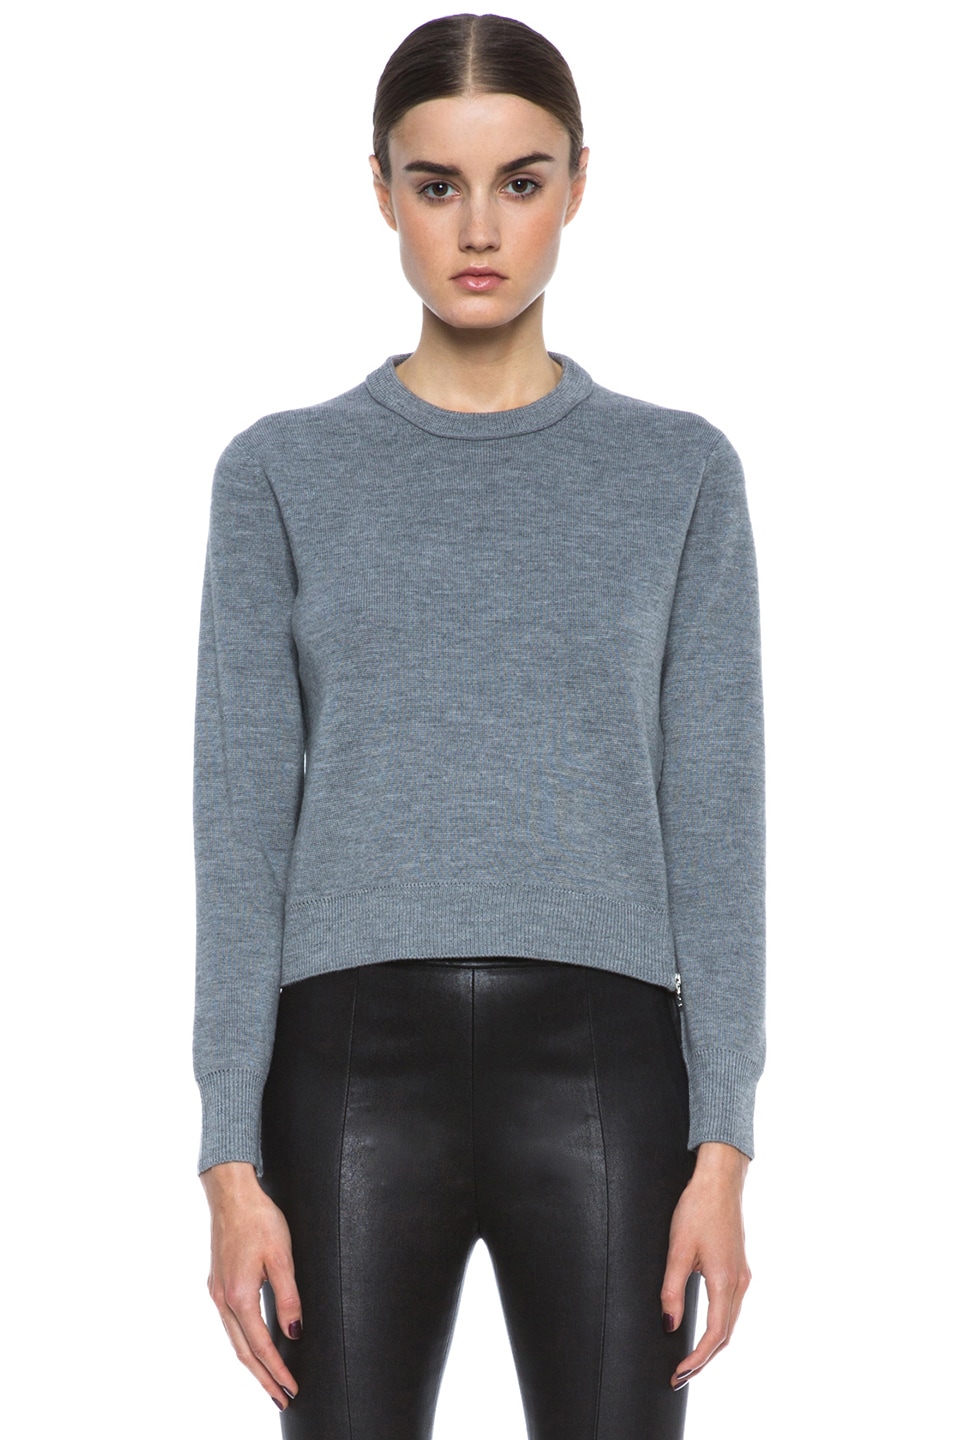 Image 1 of 3.1 phillip lim Wool Cropped Pullover with Side Zipper in Grey Melange